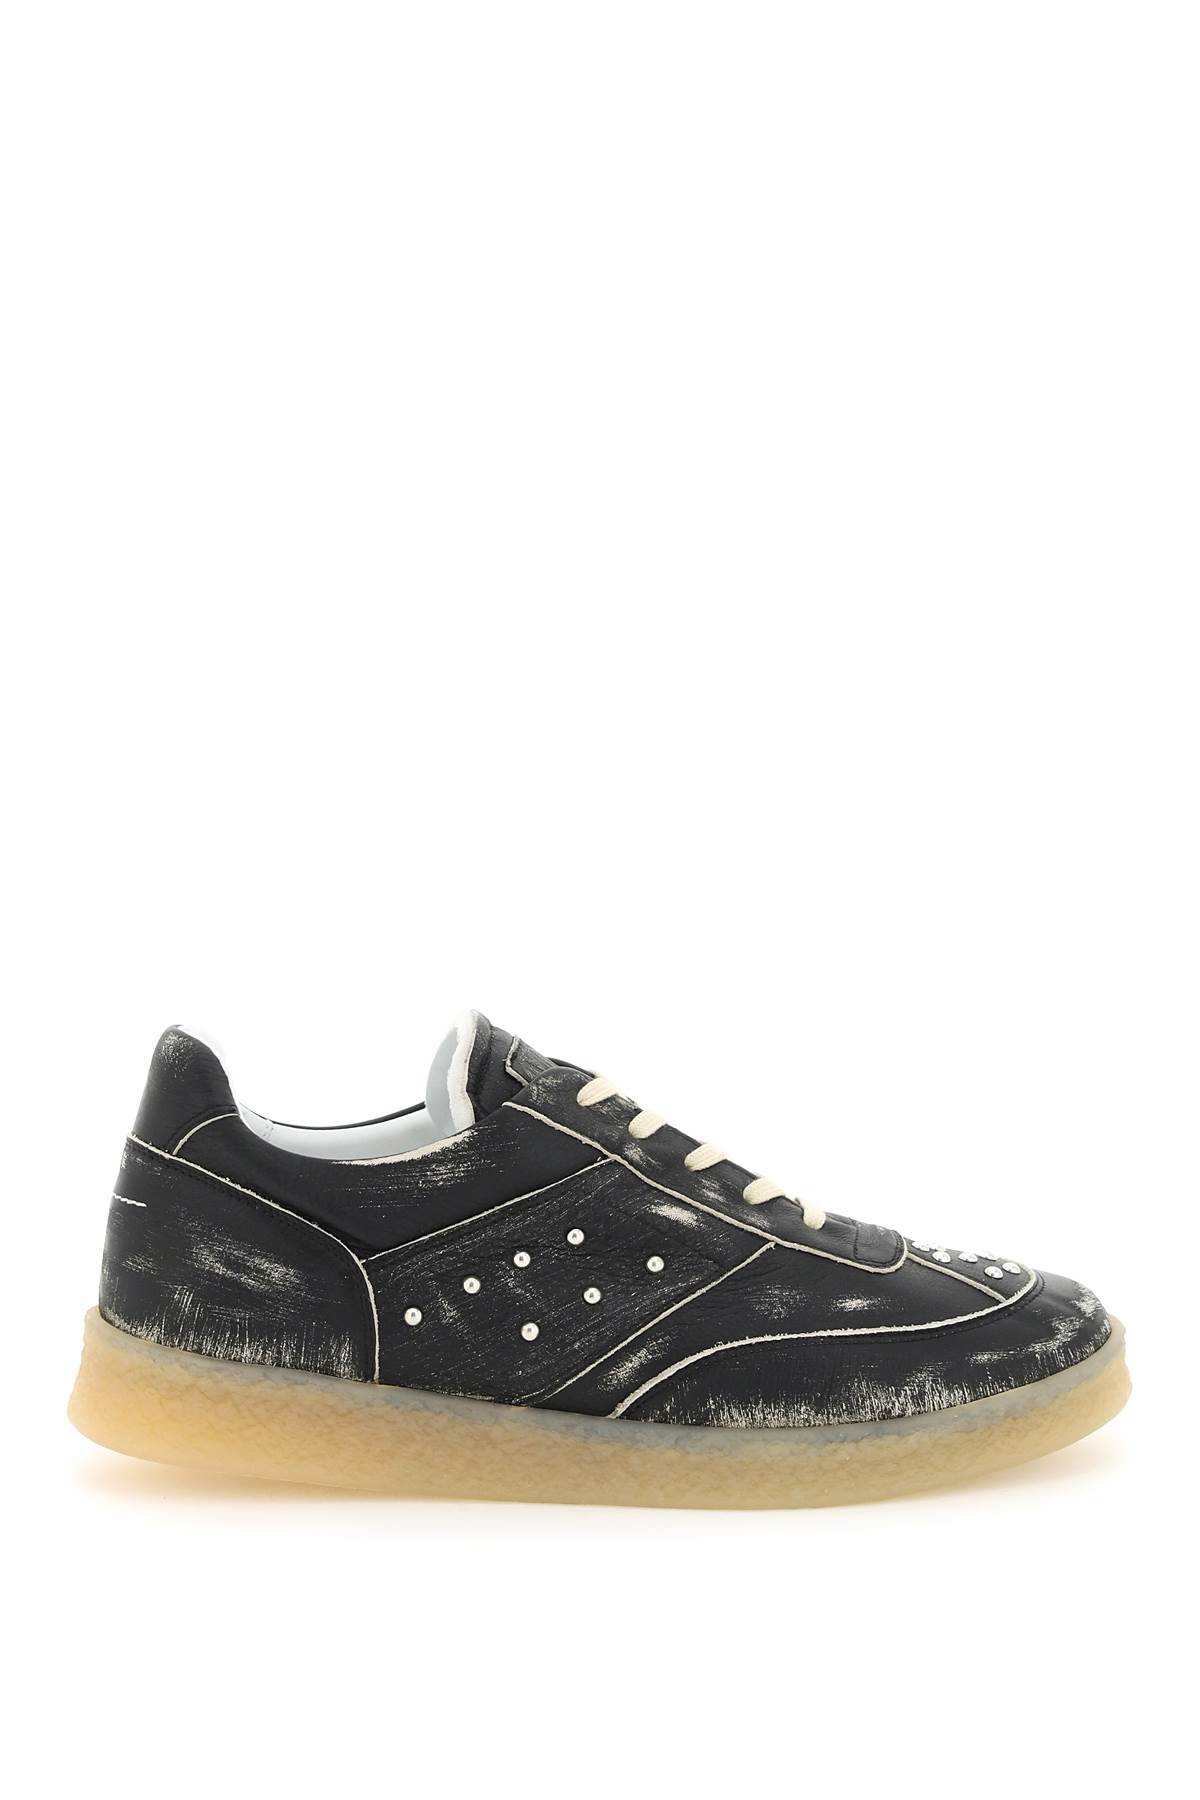 Mm6 Maison Margiela Sneakers Mm6 Black Distressed Leather Low 